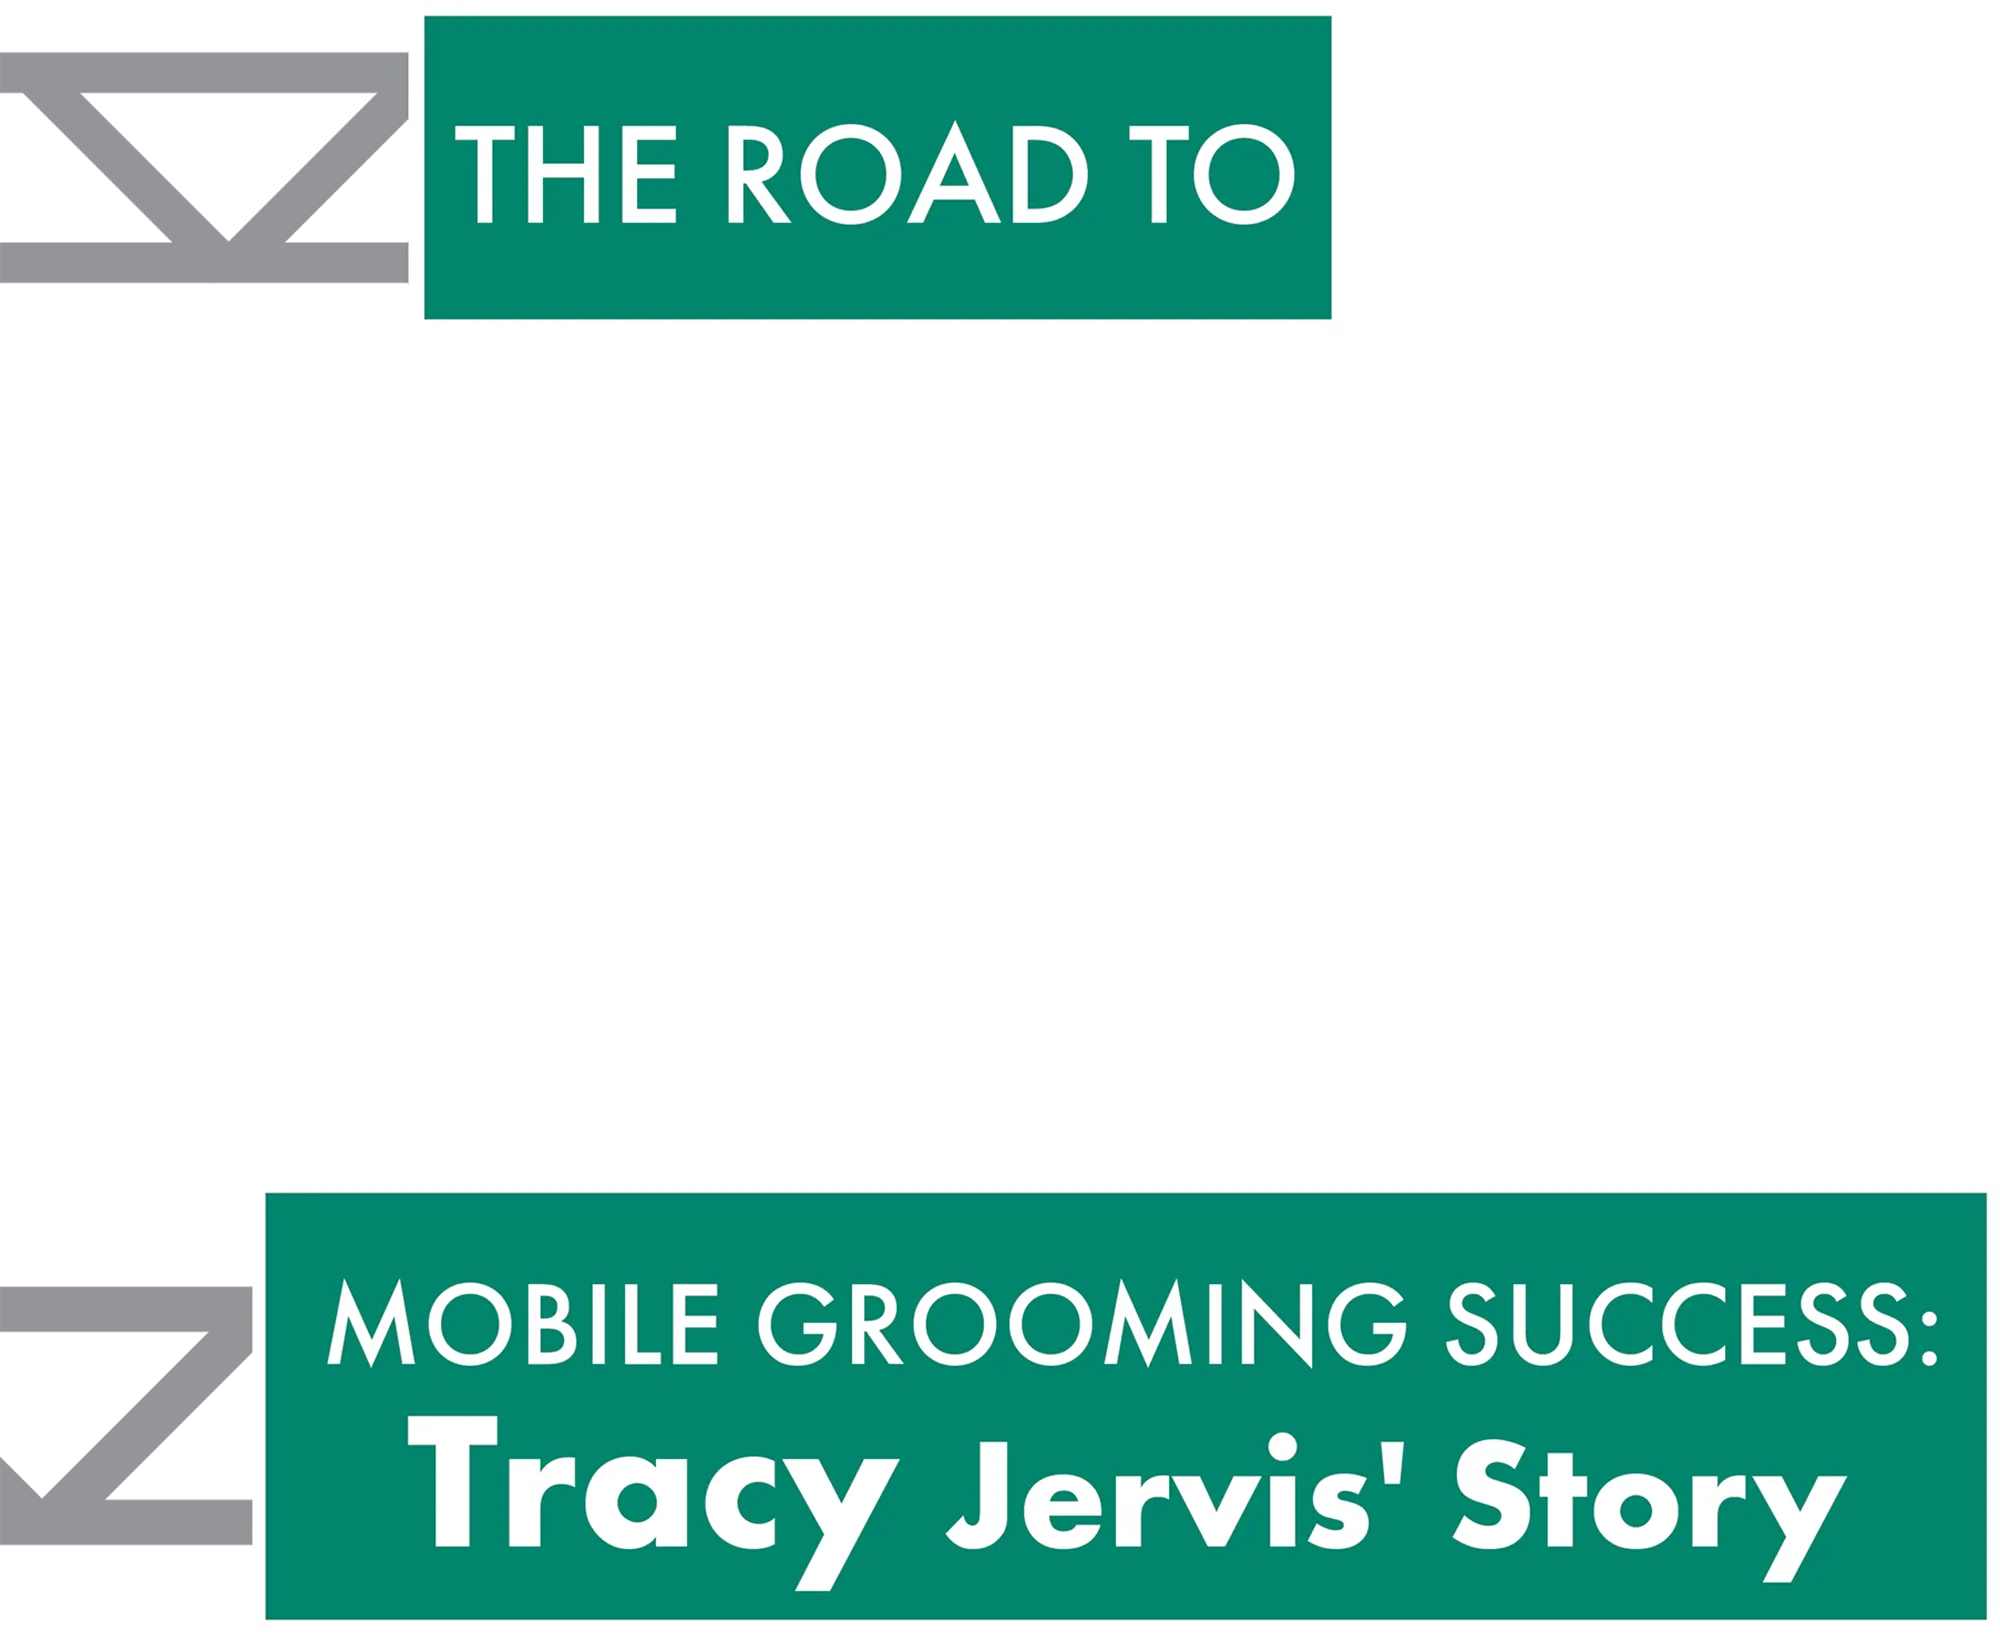 The Road To Mobile Grooming Success: Tracy Jervis' Story